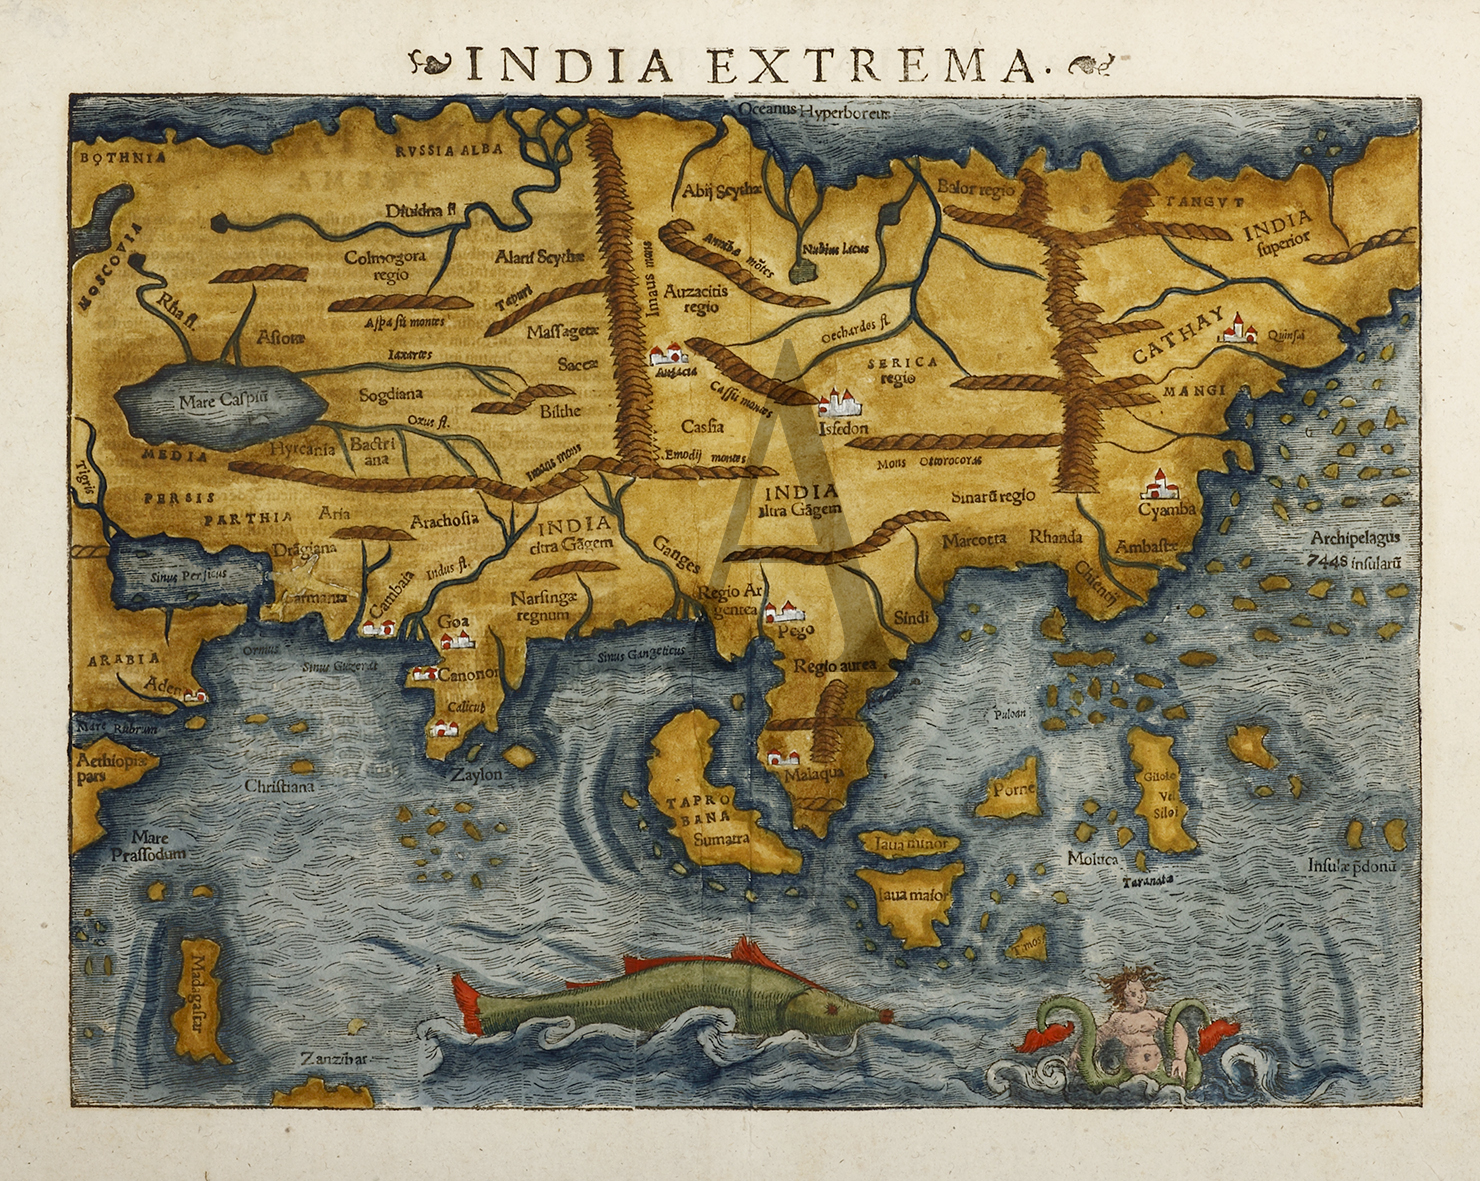 India Extrema - Antique Print from 1545